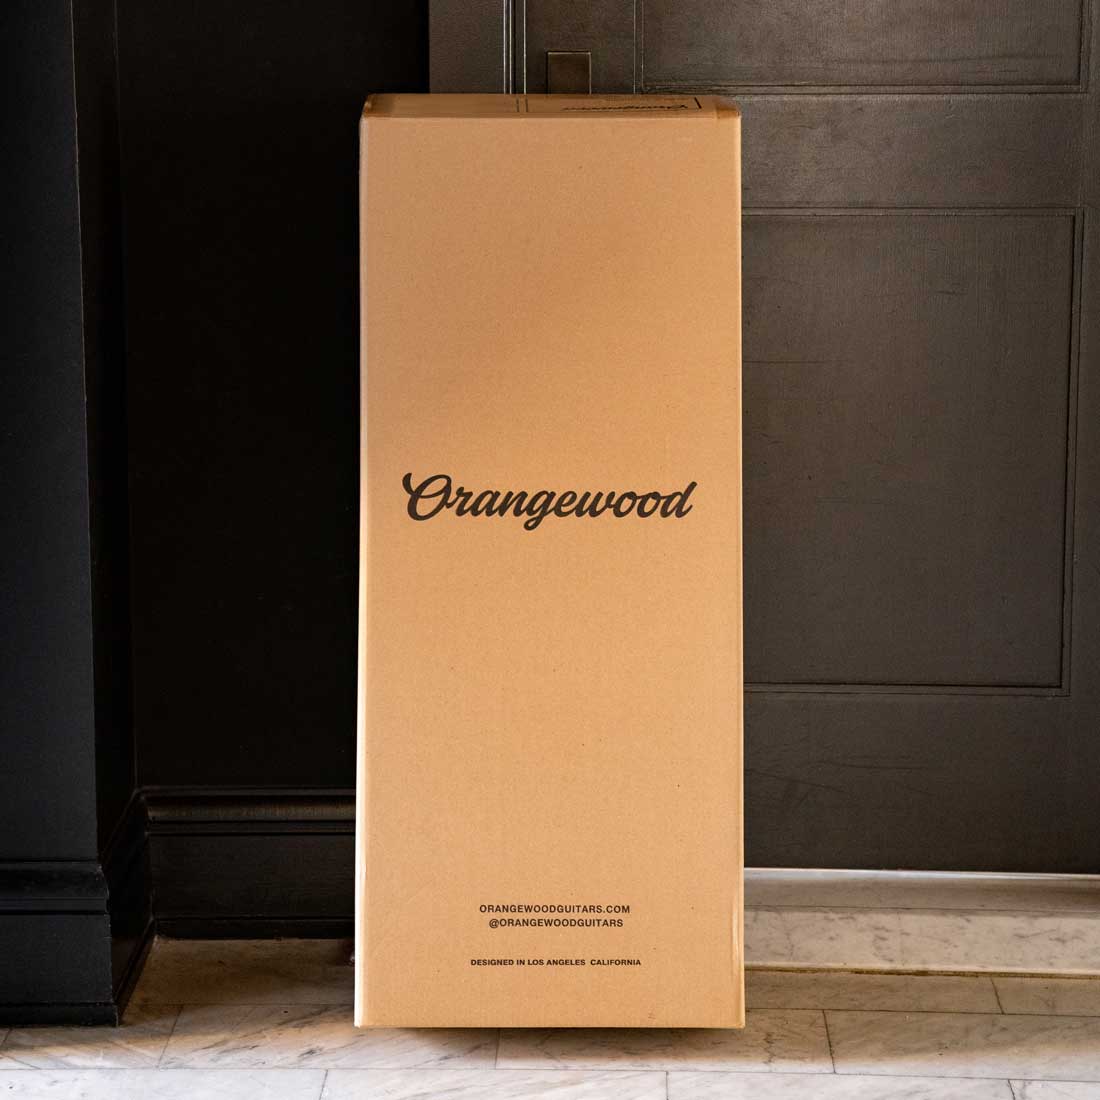 An Orangewood shipping box sits in front of a black front door on marble floors